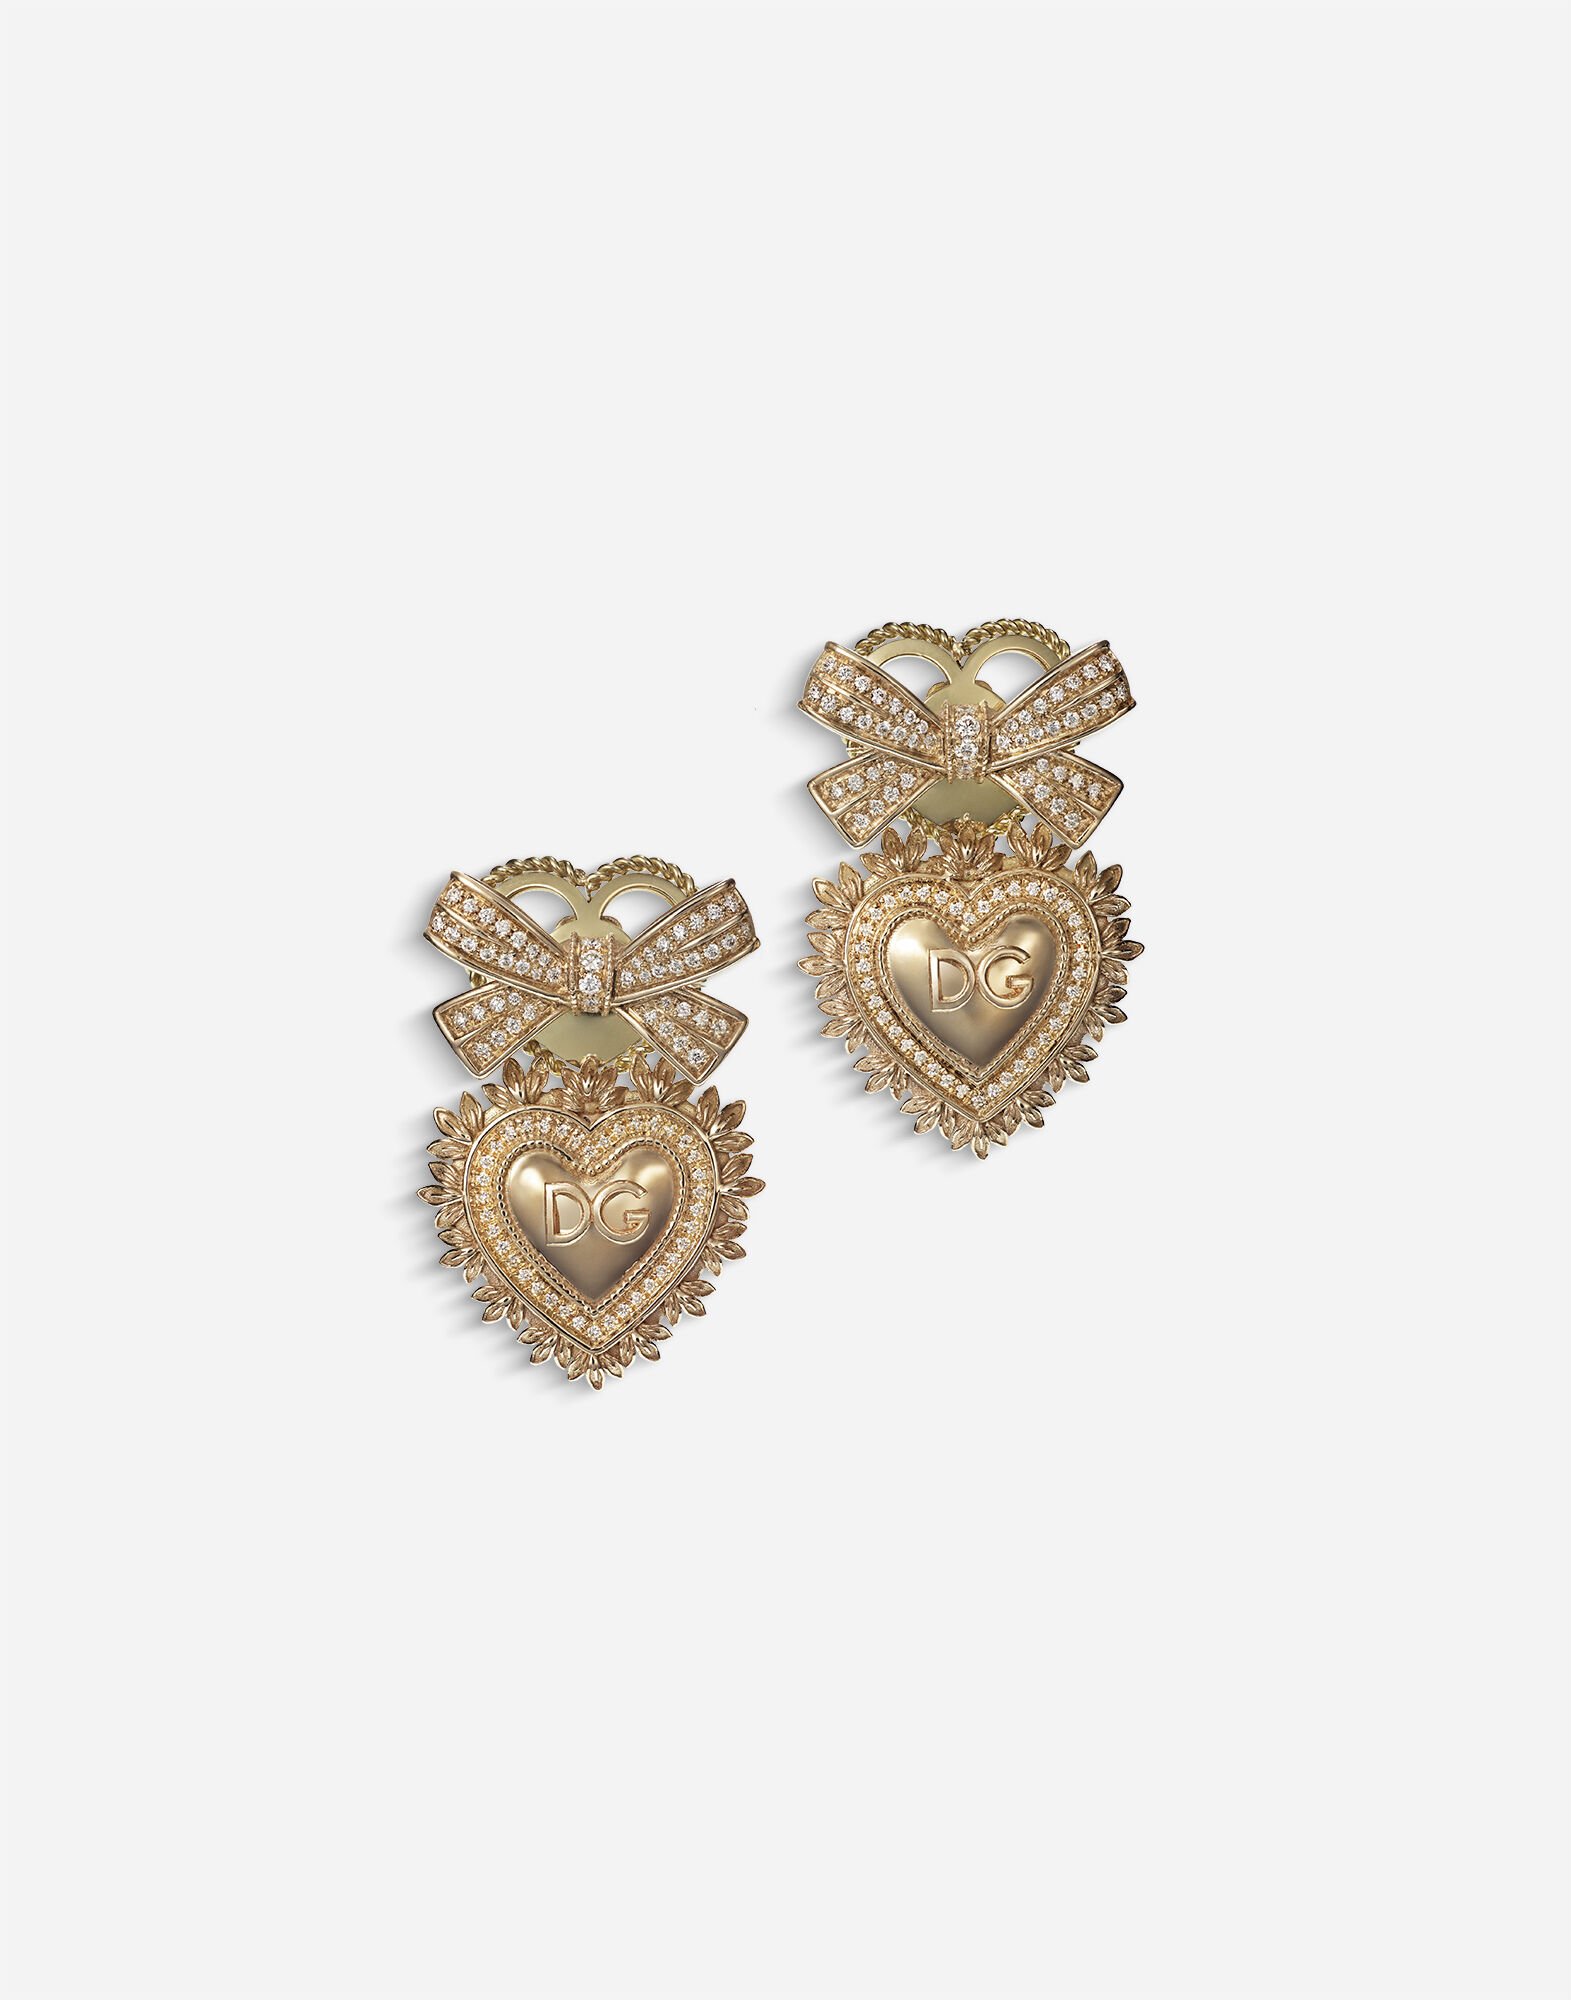 Dolce & Gabbana Devotion earrings in yellow gold with diamonds Gold BB7287AY828